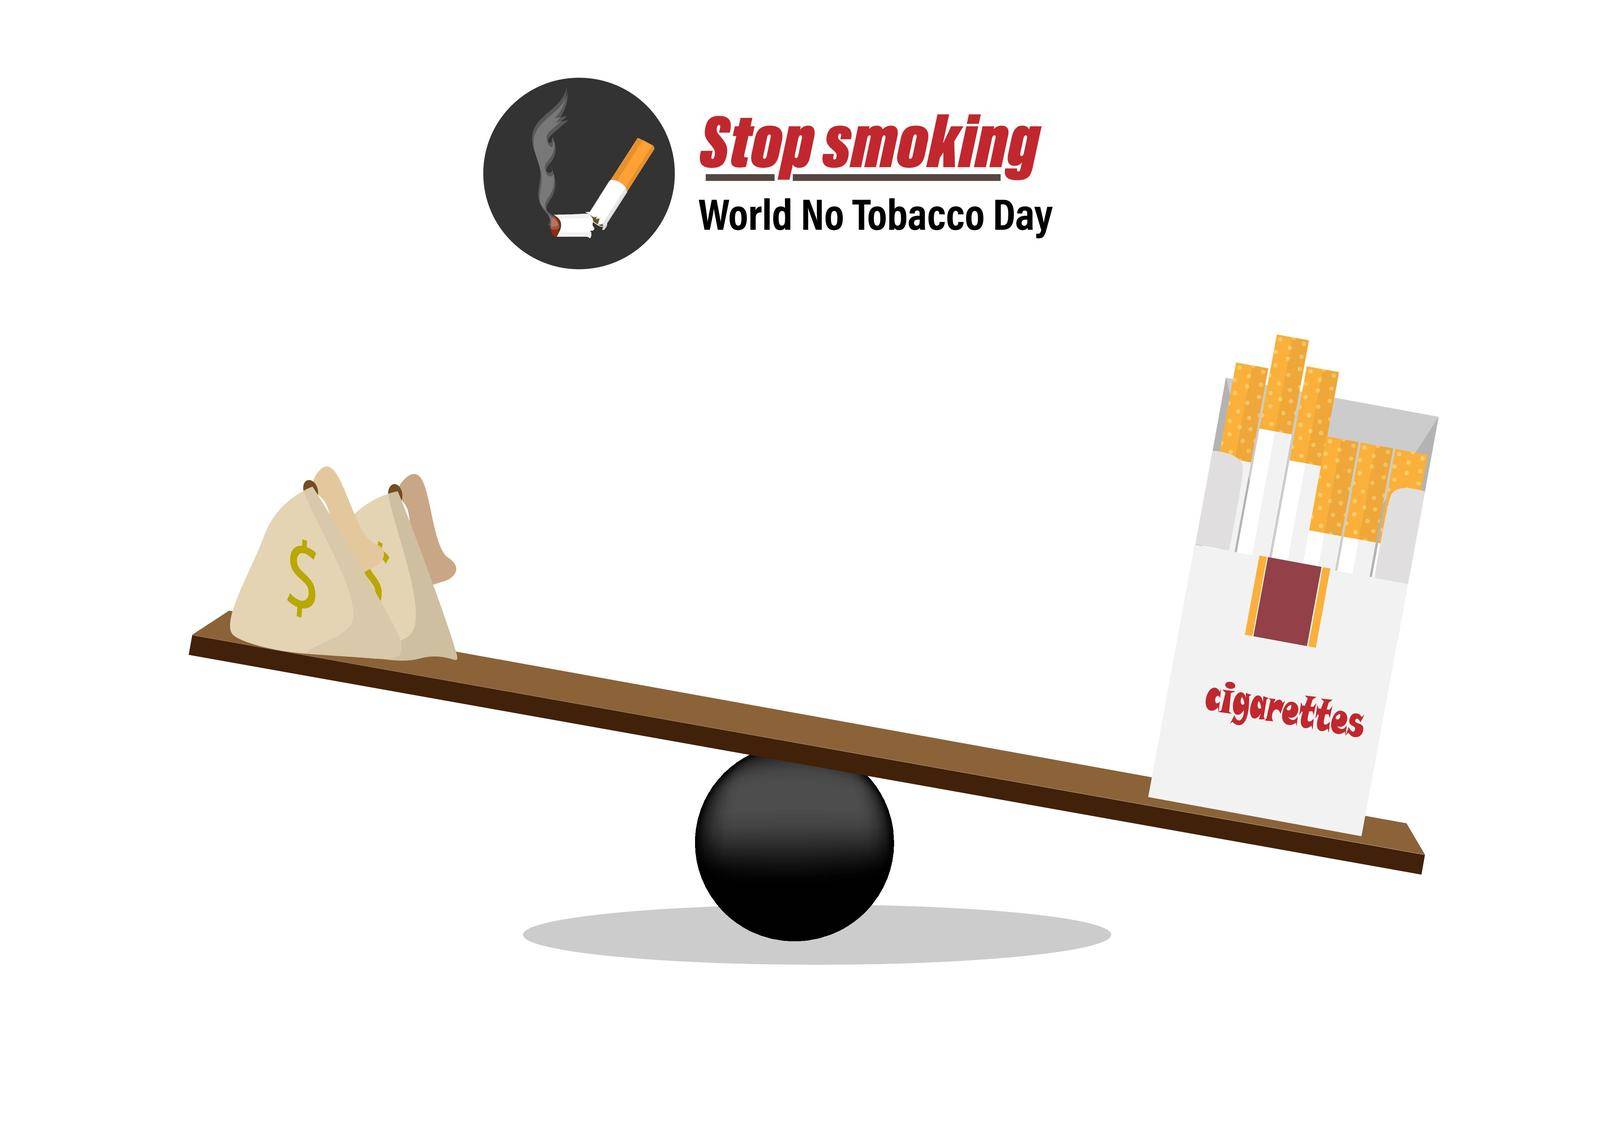 Smoking is wreaking havoc on your health and cost. Flat style cartoon illustration vector